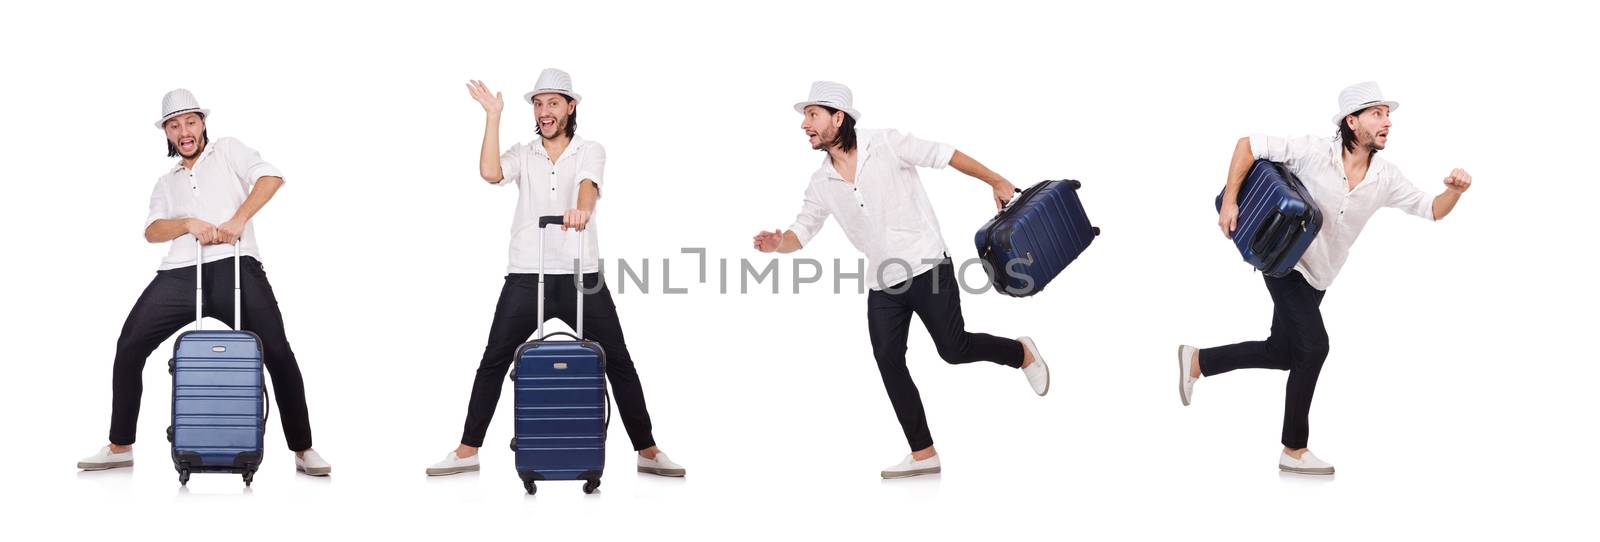 Travel vacation concept with luggage on white by Elnur